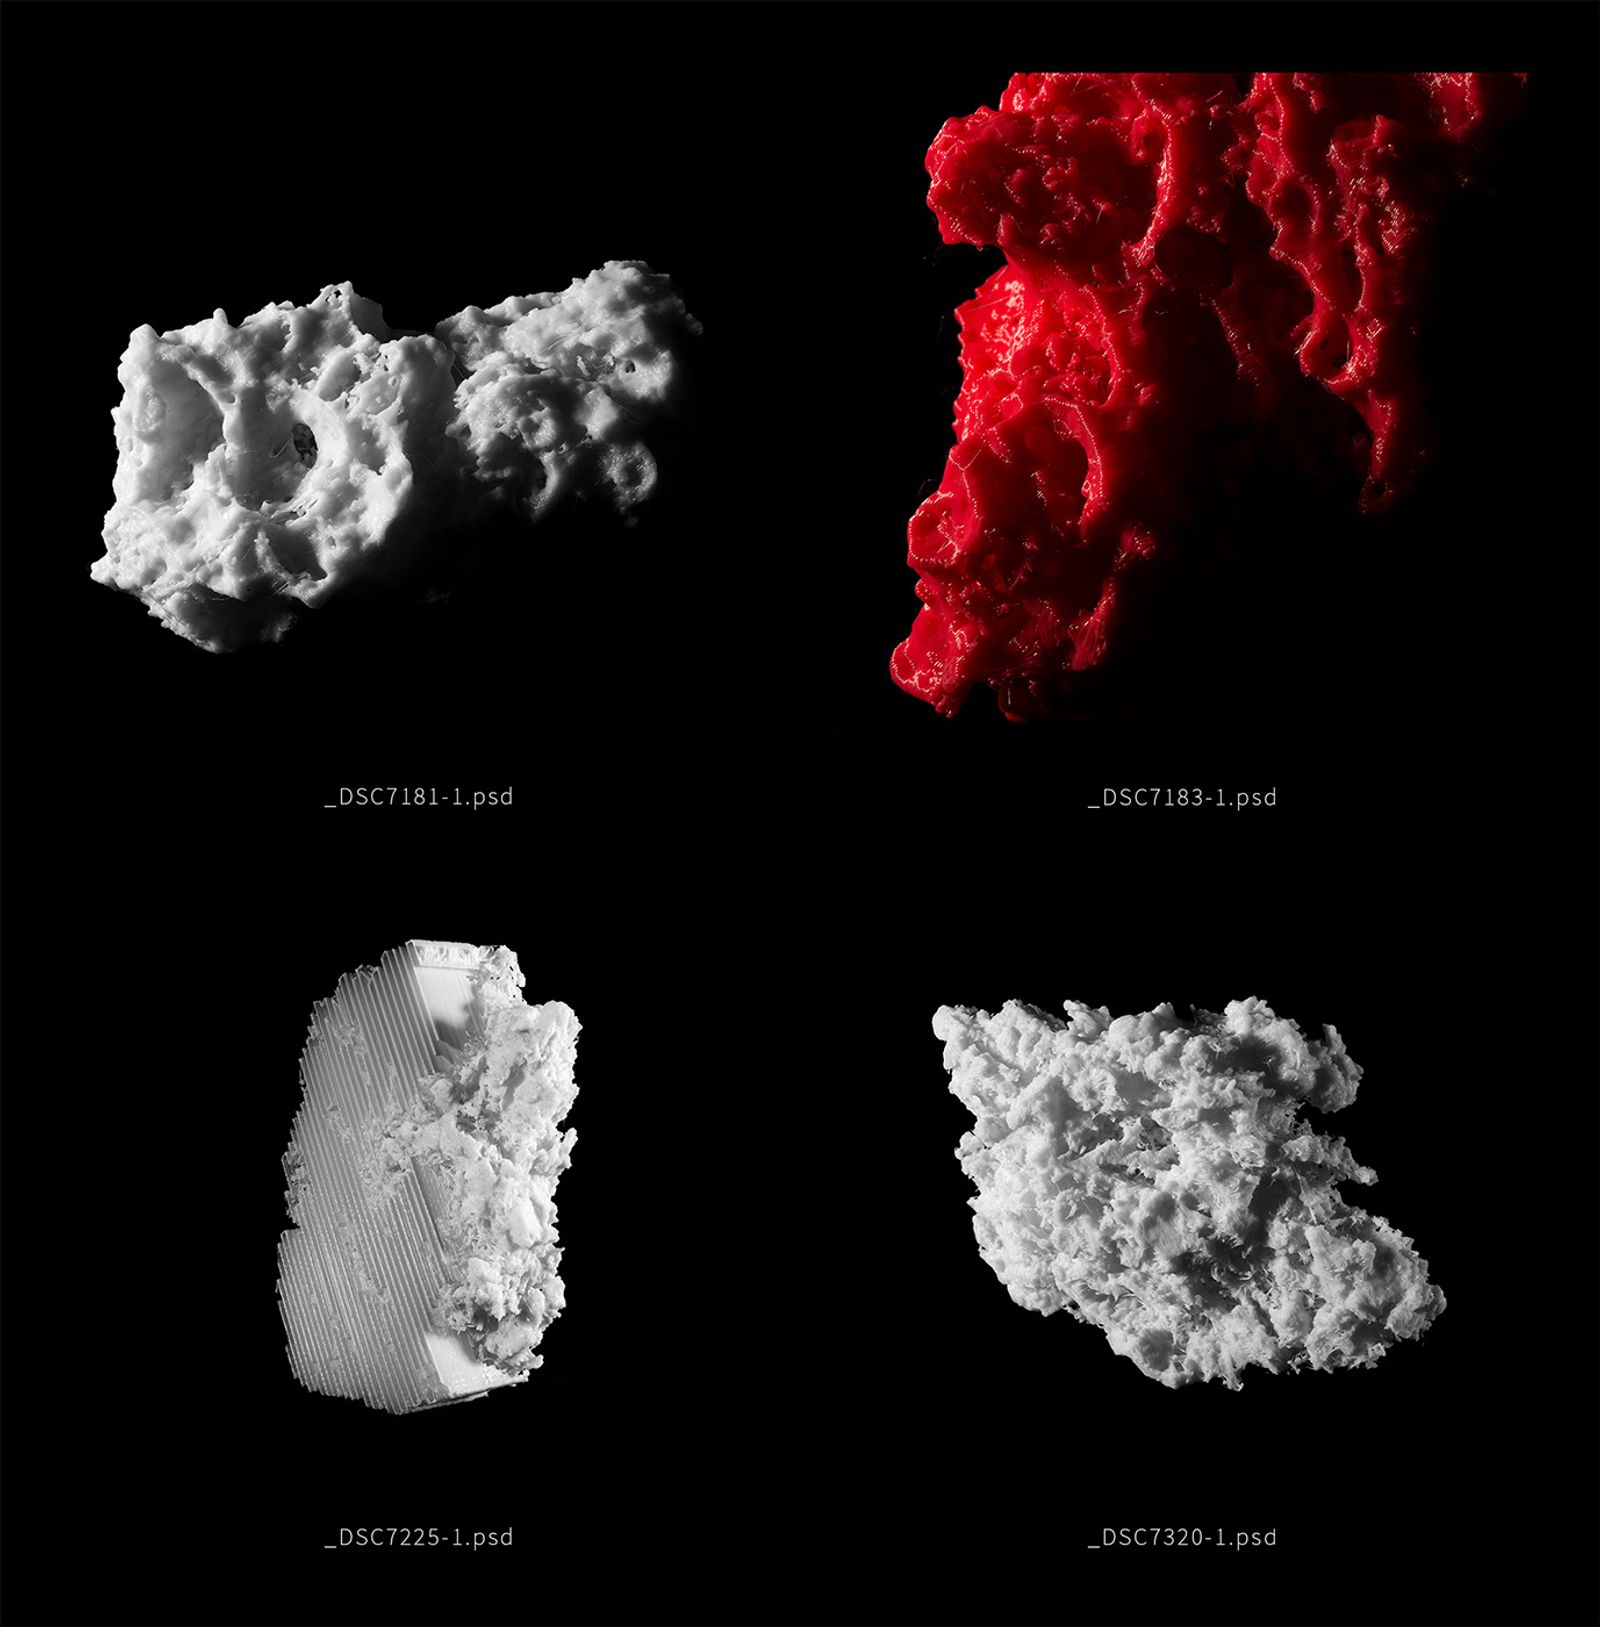 © Eric Zeigler - Micro CT Scans of False Martian soil purchased online from NASA. Used to test if growing plants is feasible on Martian soil.